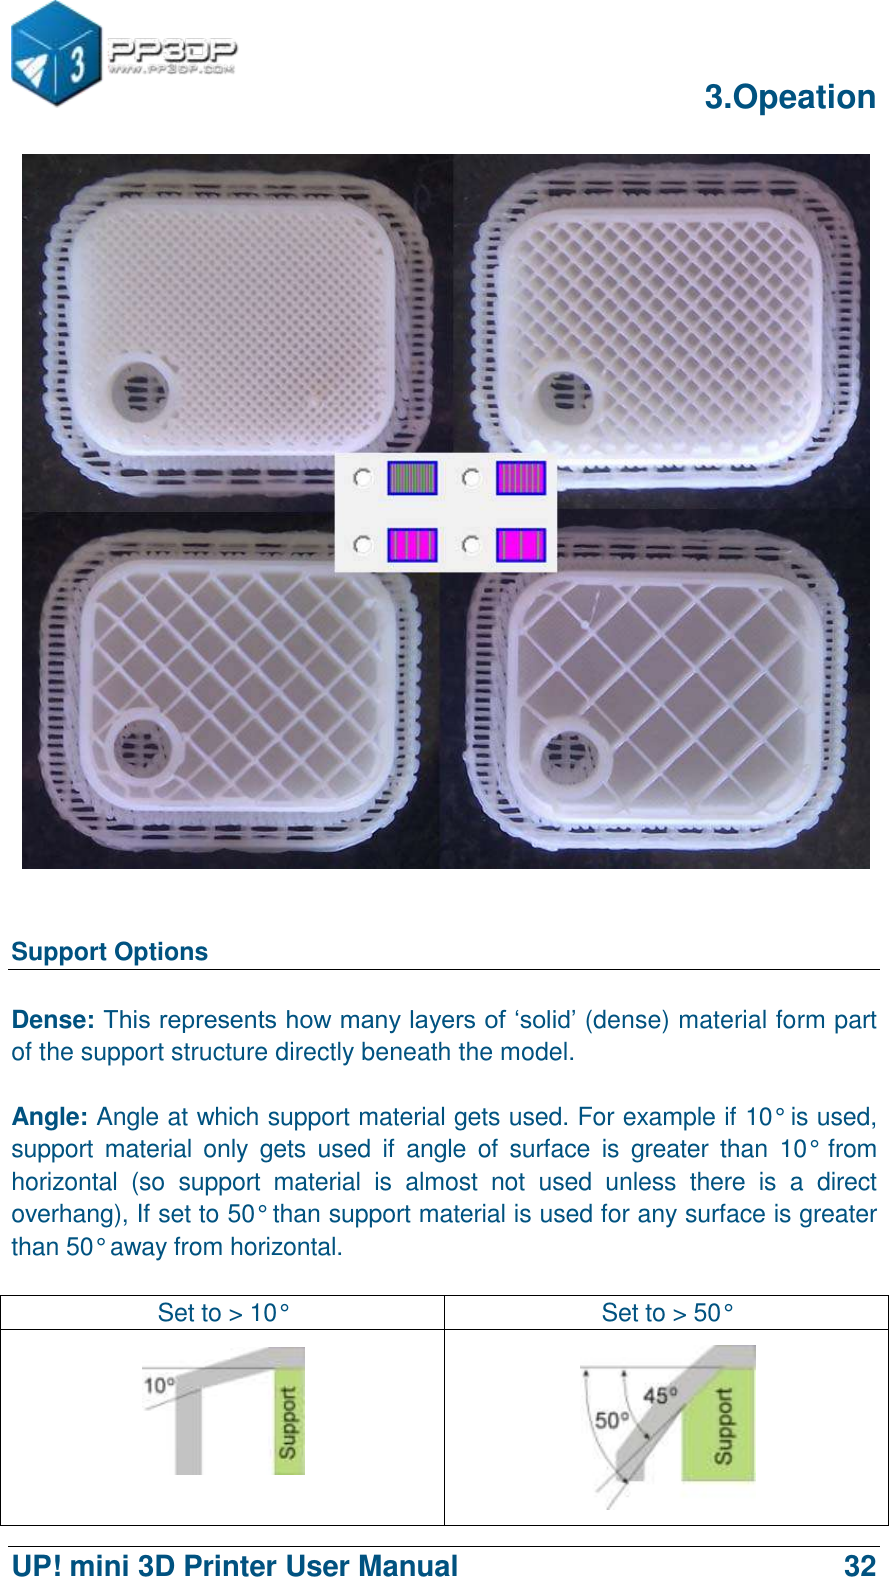      3.Opeation  UP! mini 3D Printer User Manual                                32    Support Options  Dense: This represents how many layers of „solid‟ (dense) material form part of the support structure directly beneath the model.    Angle: Angle at which support material gets used. For example if 10° is used, support  material  only  gets  used  if  angle  of  surface  is  greater  than  10°  from horizontal  (so  support  material  is  almost  not  used  unless  there  is  a  direct overhang), If set to 50° than support material is used for any surface is greater than 50° away from horizontal.  Set to &gt; 10° Set to &gt; 50°   